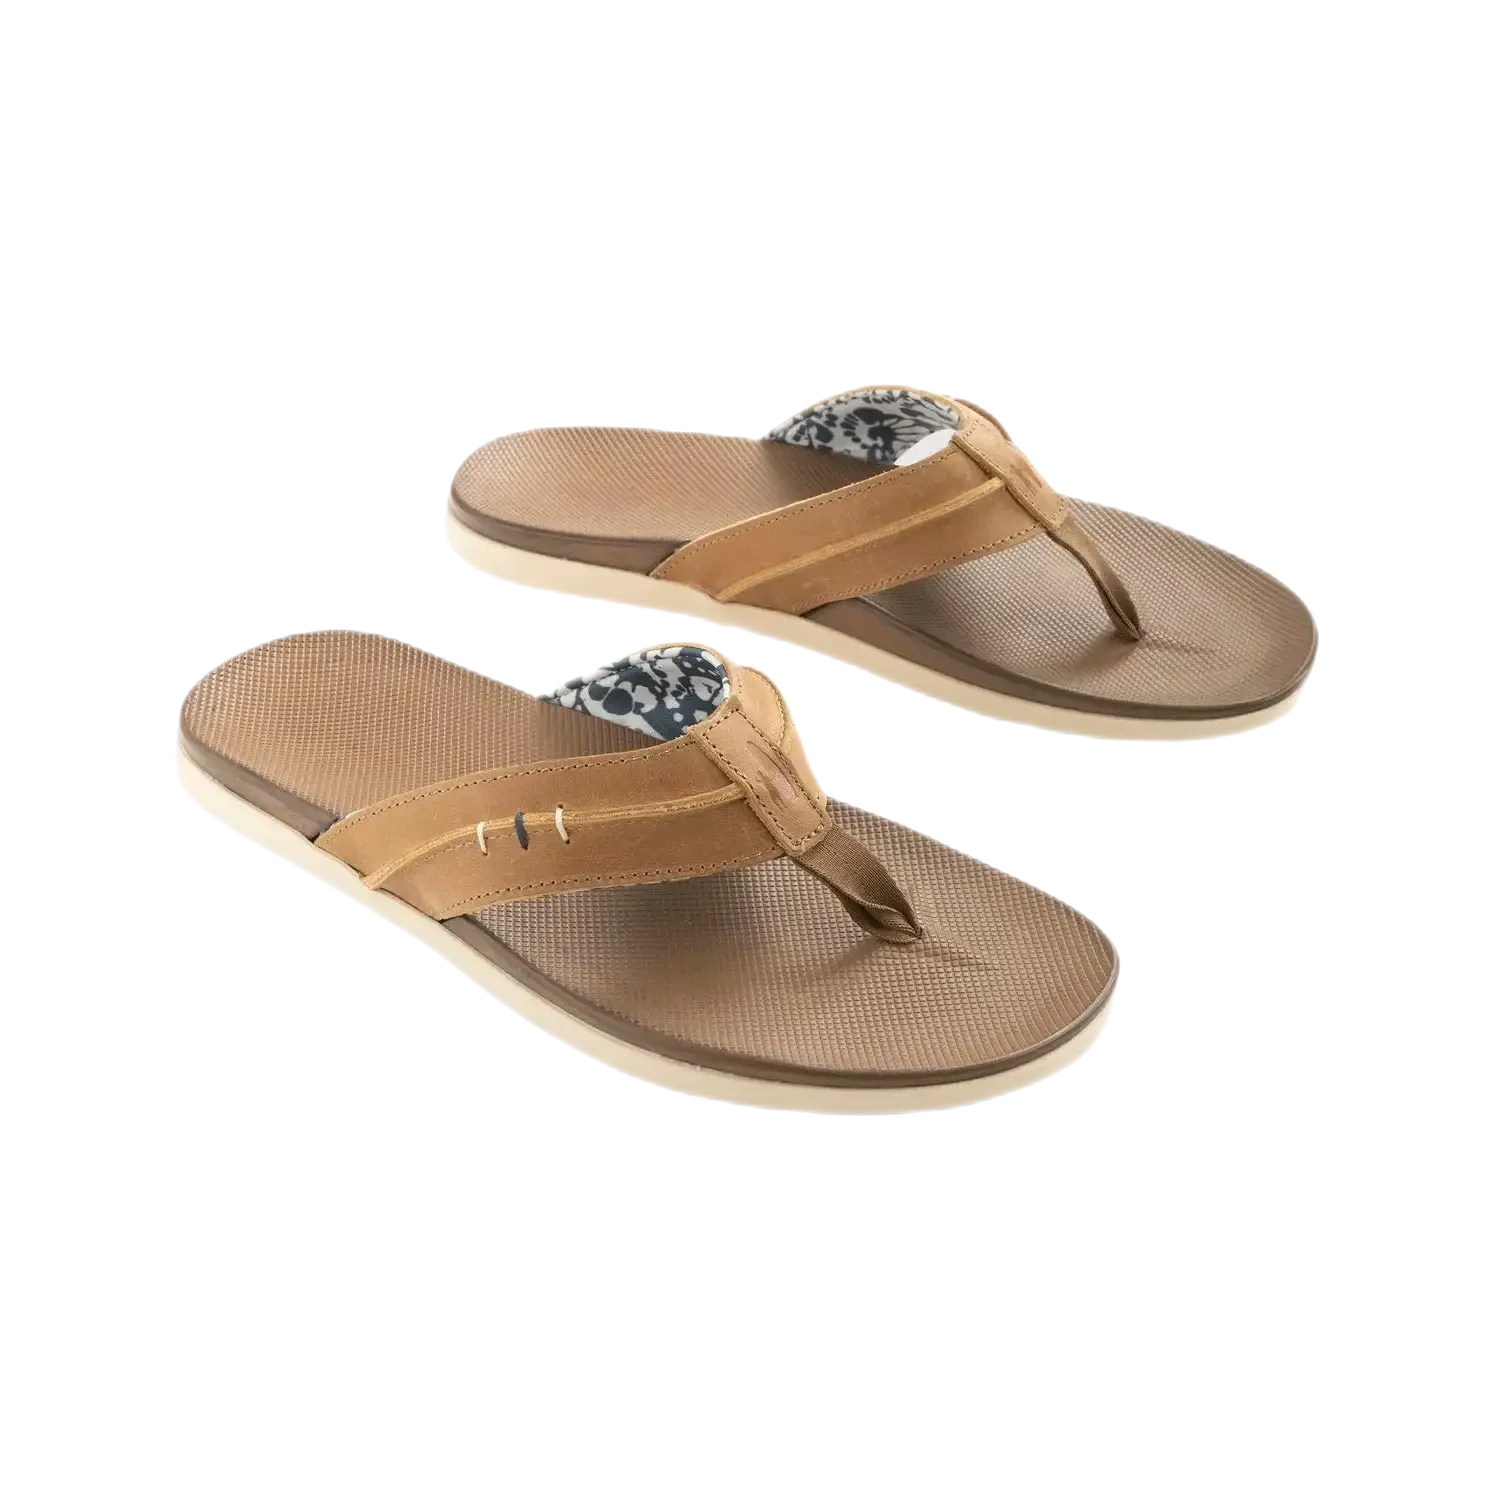 johnnie-O MENS FOOTWEAR - MENS SHOES - MENS SHOES CASUAL Men's Starboard Leather Sandal TAUPE